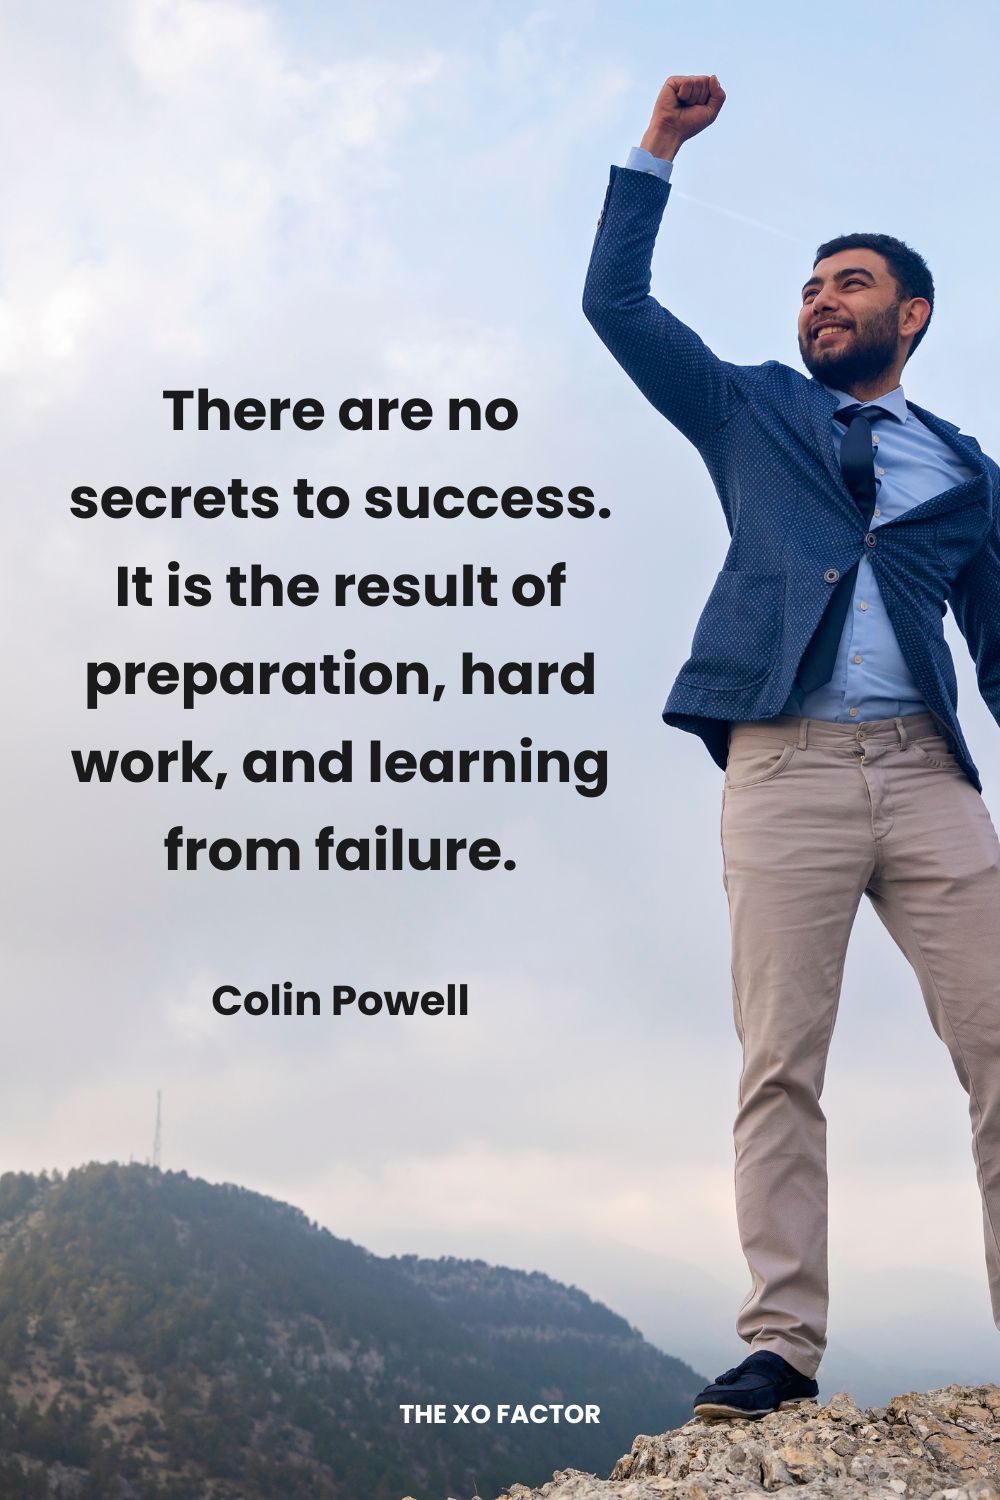 There are no secrets to success. It is the result of preparation, hard work, and learning from failure. Colin Powell